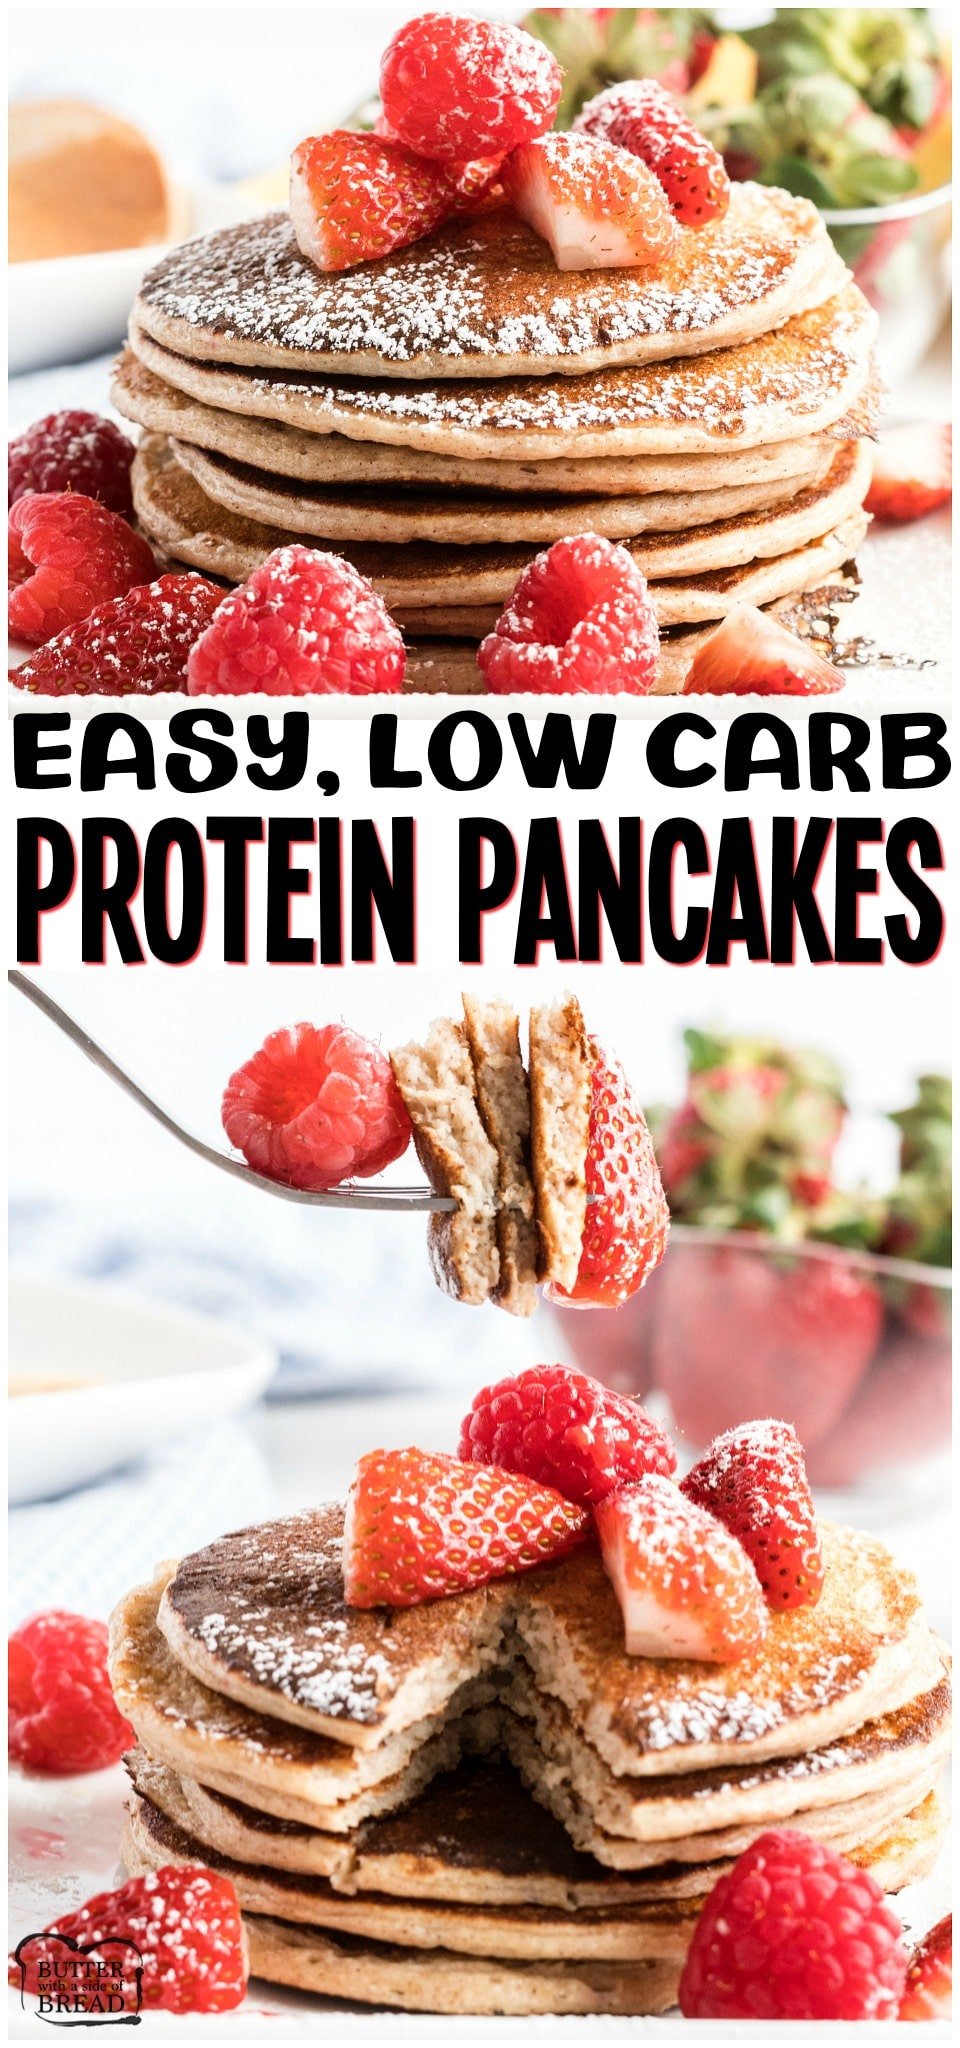 Easy Protein Pancakes recipe packed with protein and healthy ingredients to make a gluten free low carb pancake worthy of your breakfast table. #lowcarb #protein #pancakes #homemade #oats #cottagecheese #breakfast #healthy #recipe from BUTTER WITH A SIDE OF BREAD